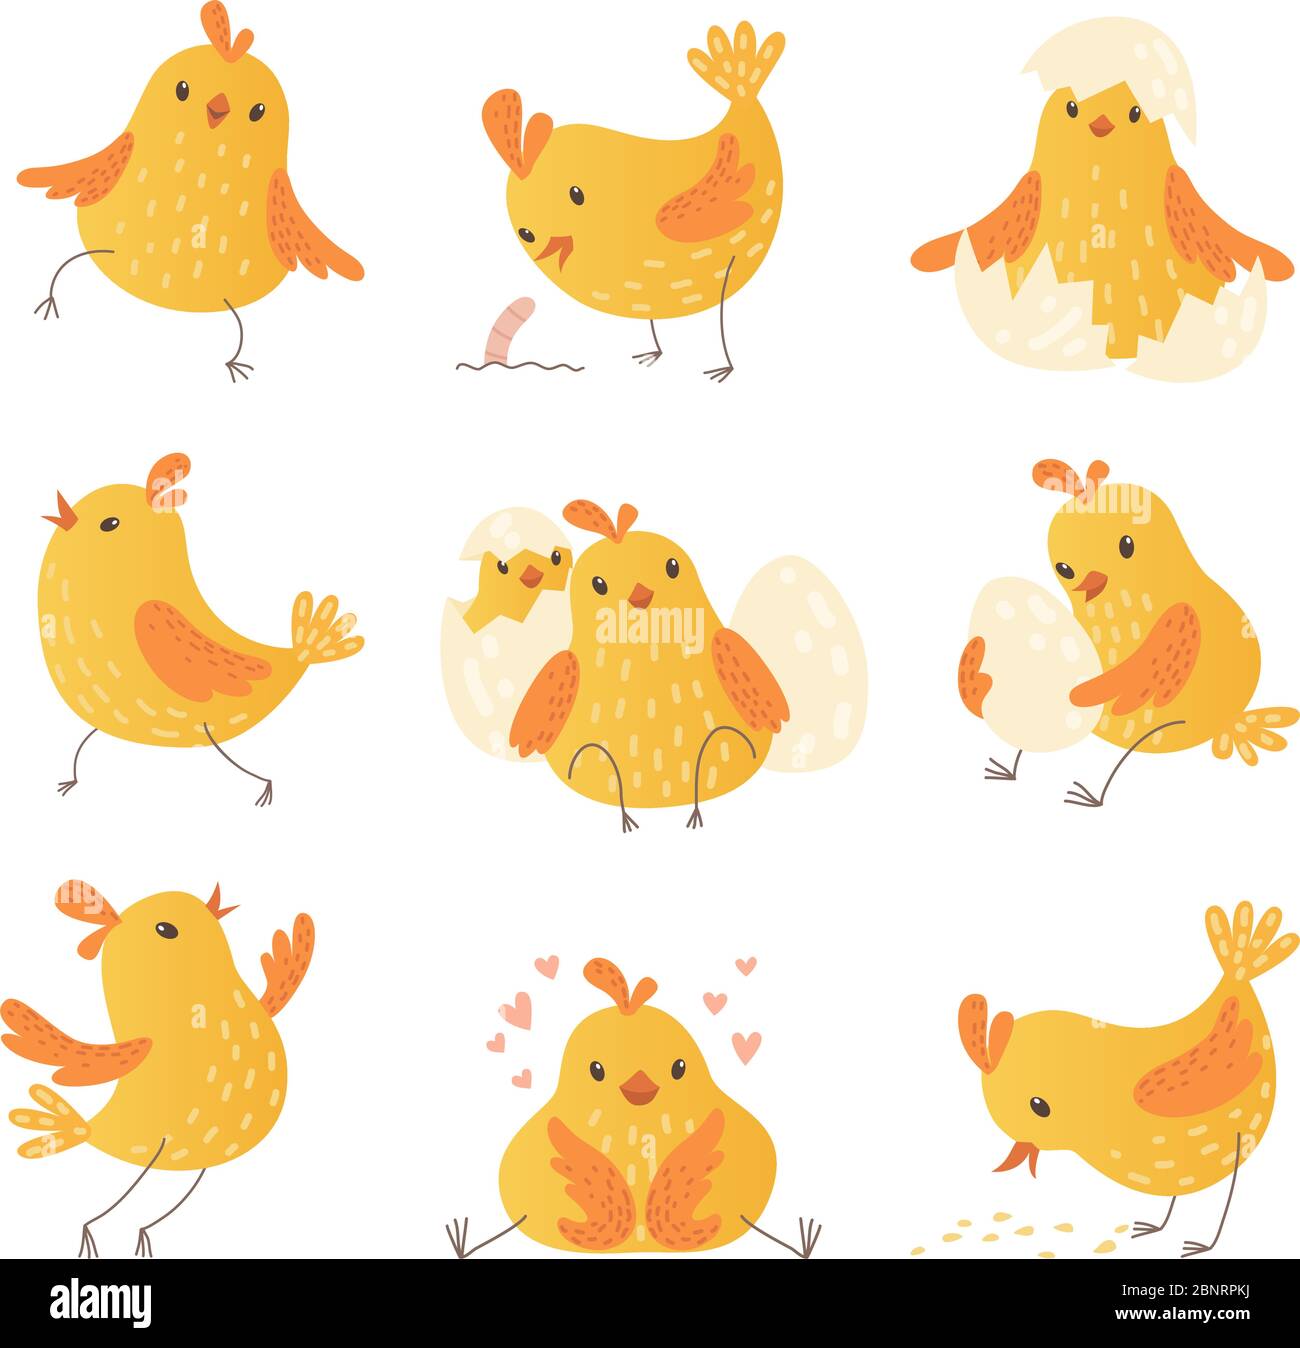 Cartoon chicken. Egg cute yellow little farm birds funny chick vector characters collection Stock Vector